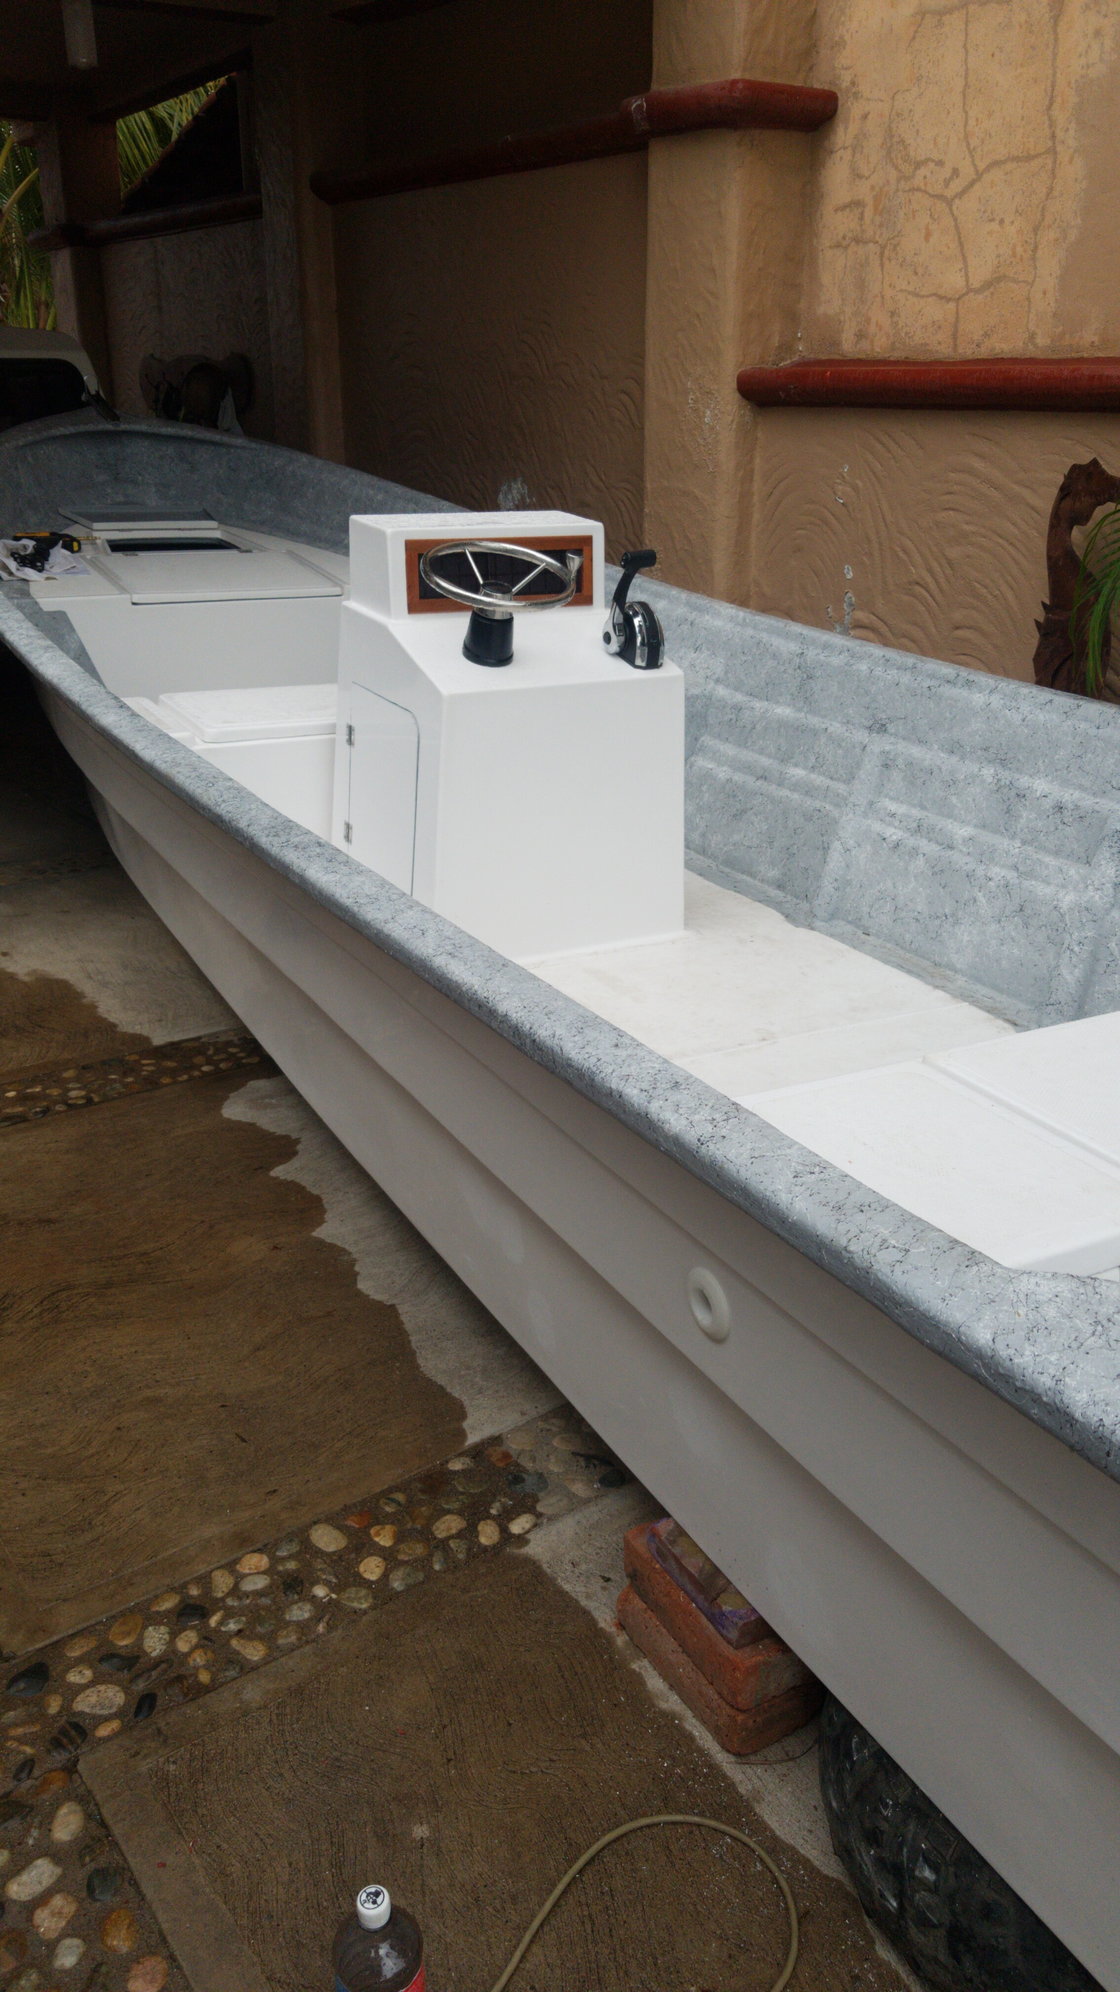 Installing flush mount rod holders in fiberglass - The Hull Truth - Boating  and Fishing Forum